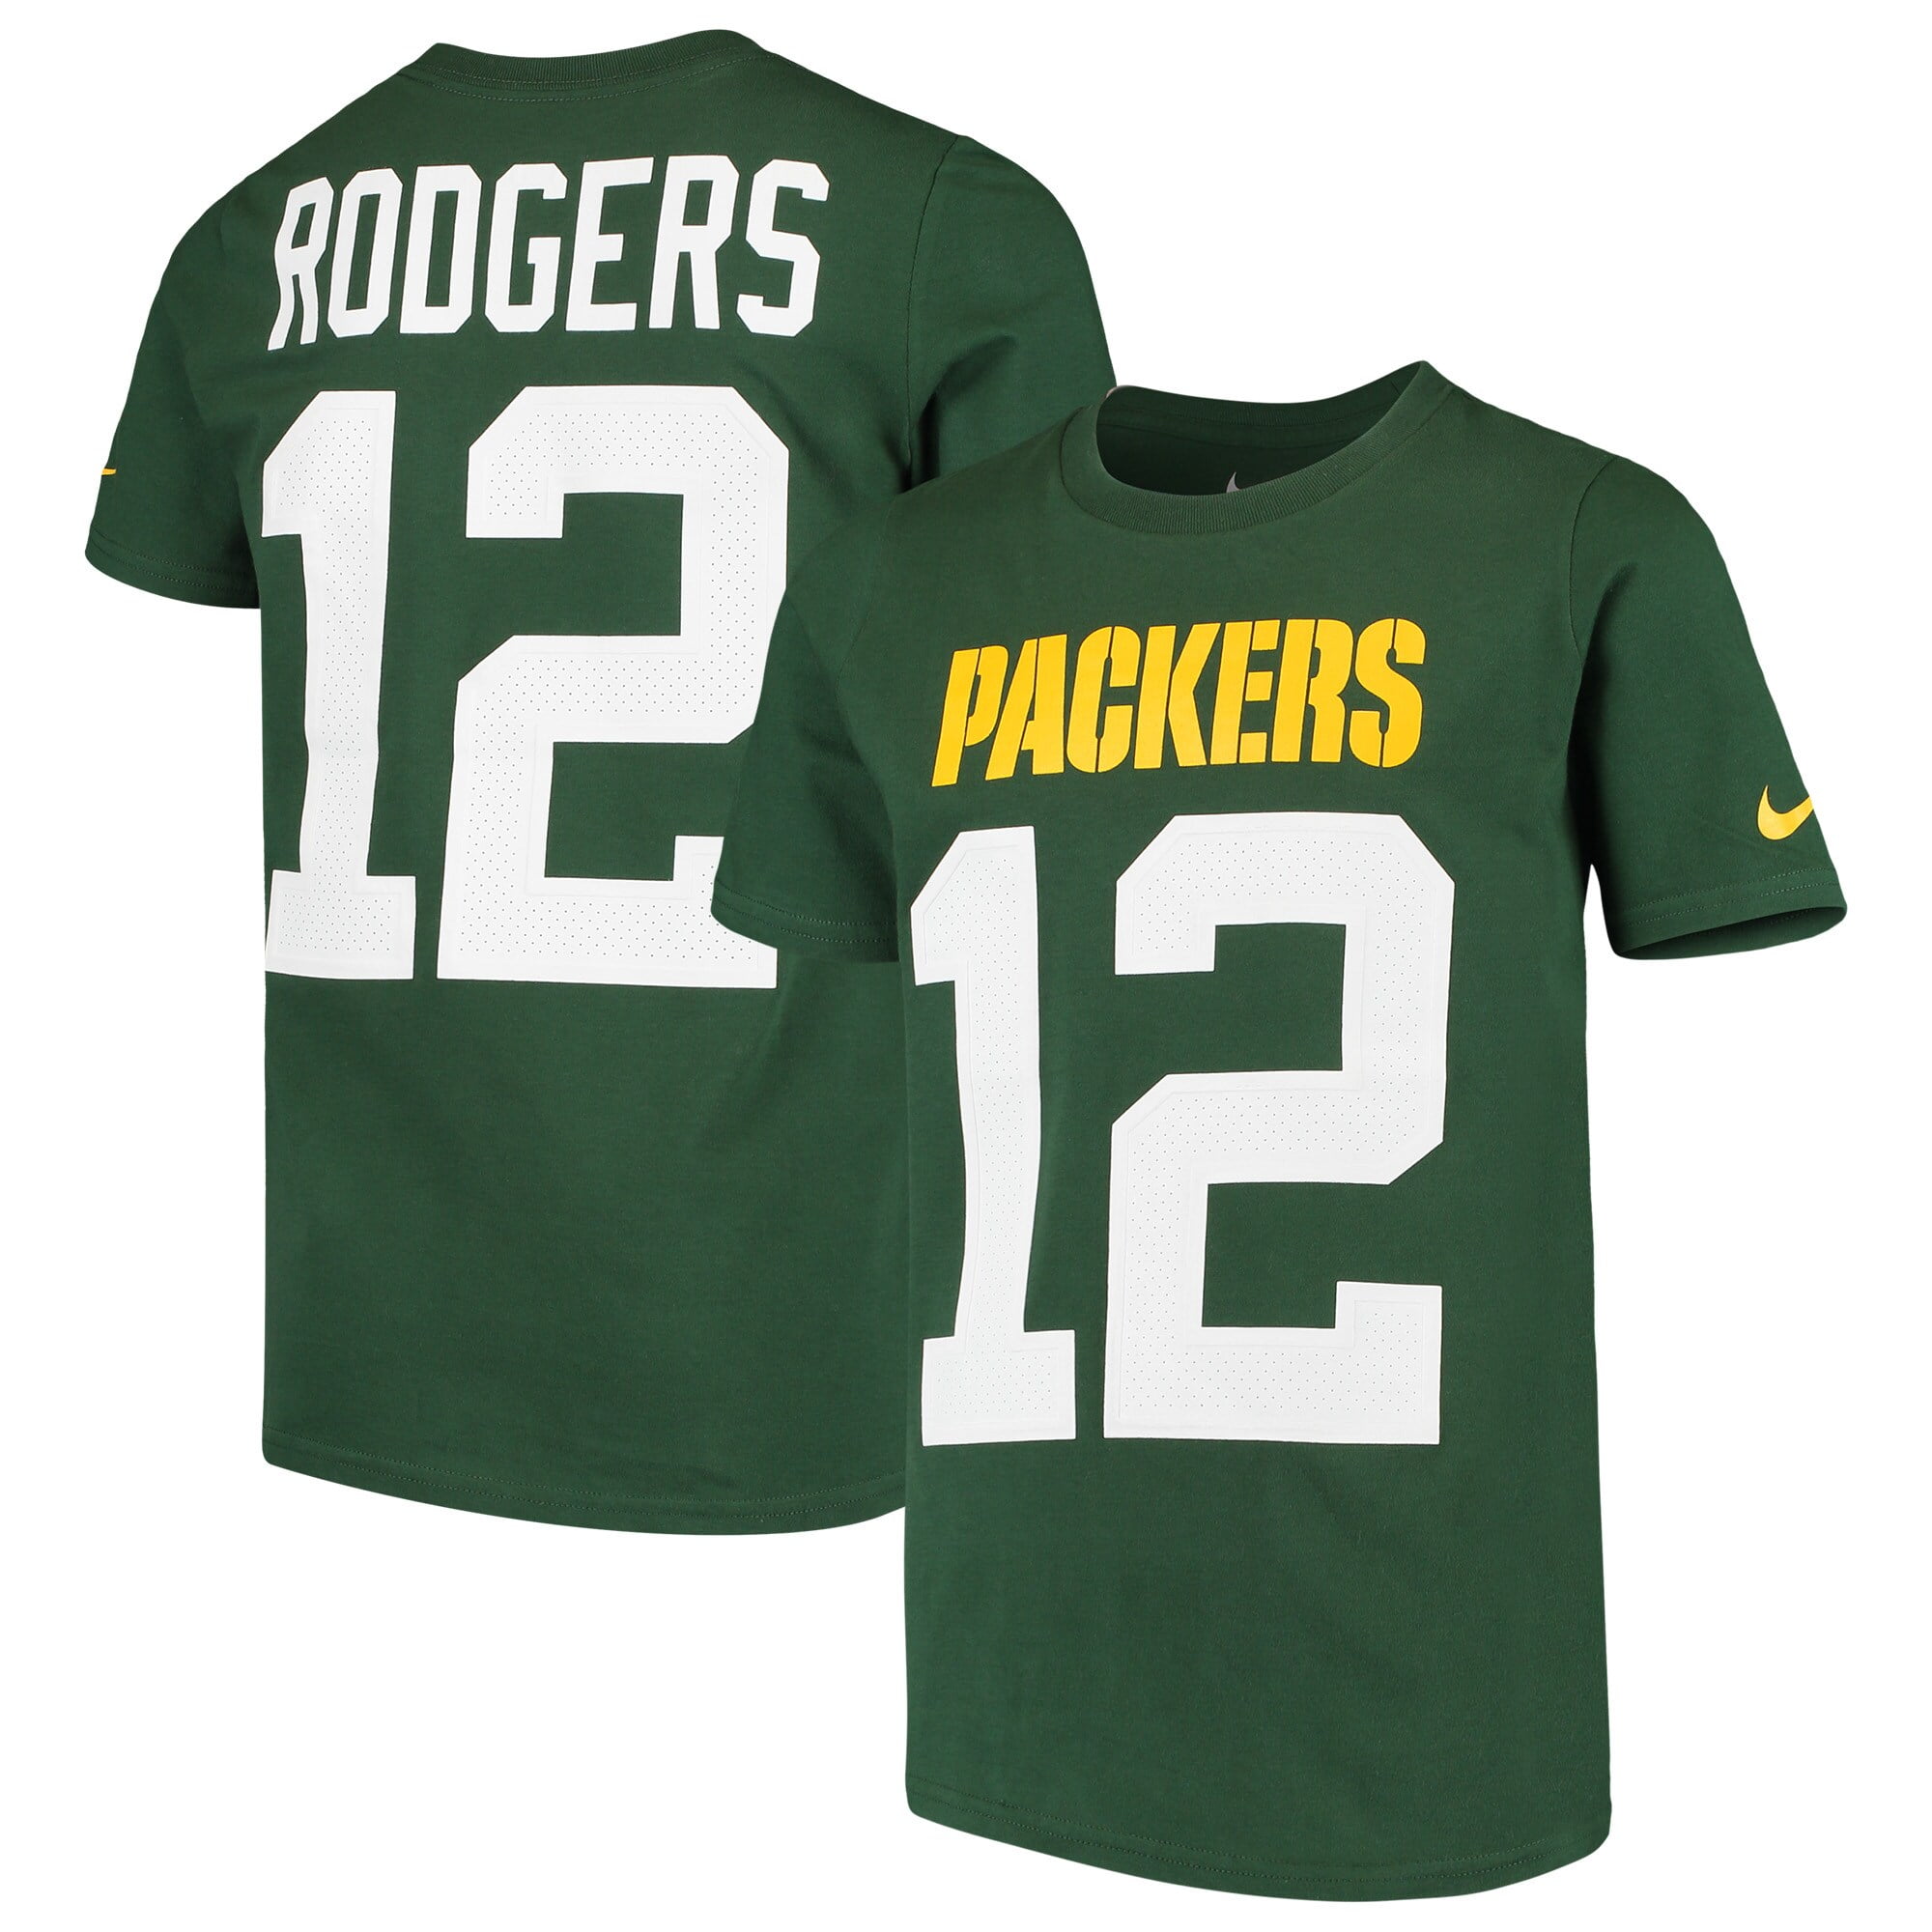 Nike - Aaron Rodgers Green Bay Packers Nike Youth Player Pride 3.0 Name ...